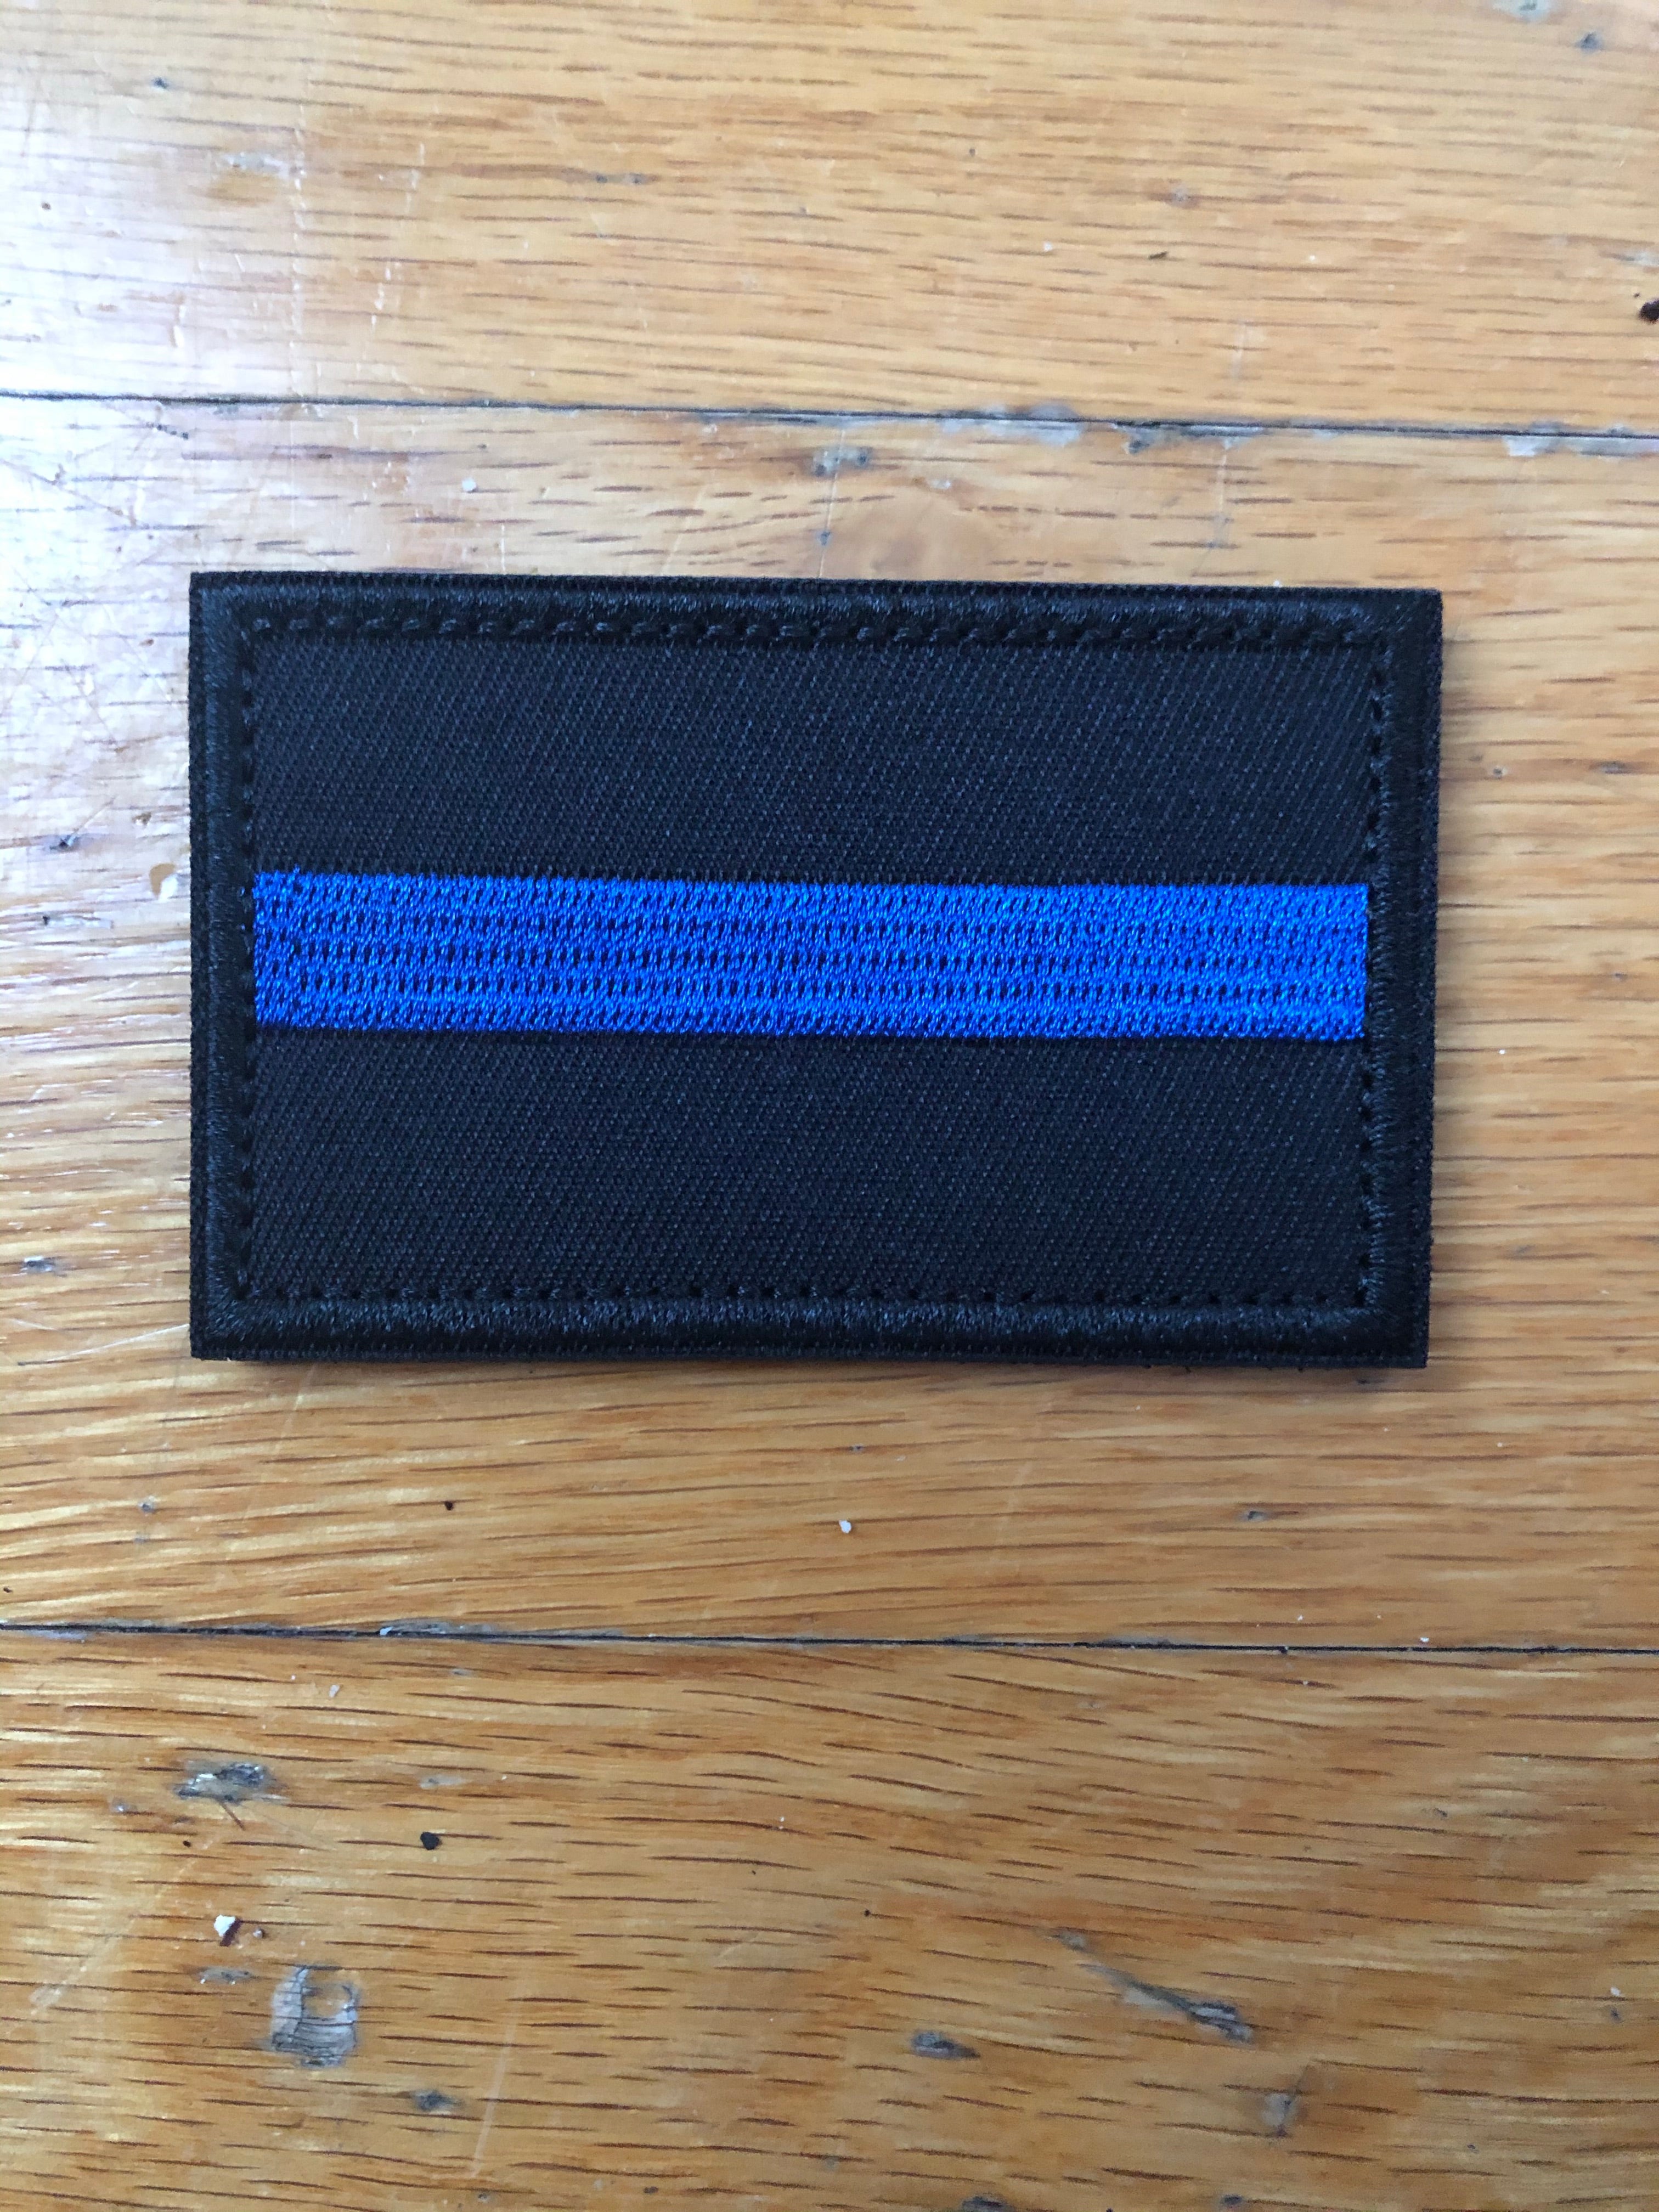 SECURITY BLUE ON BLACK PCX PATCH PAIR 3.5 x 2 WITH VELCRO® BRAND FASTENER